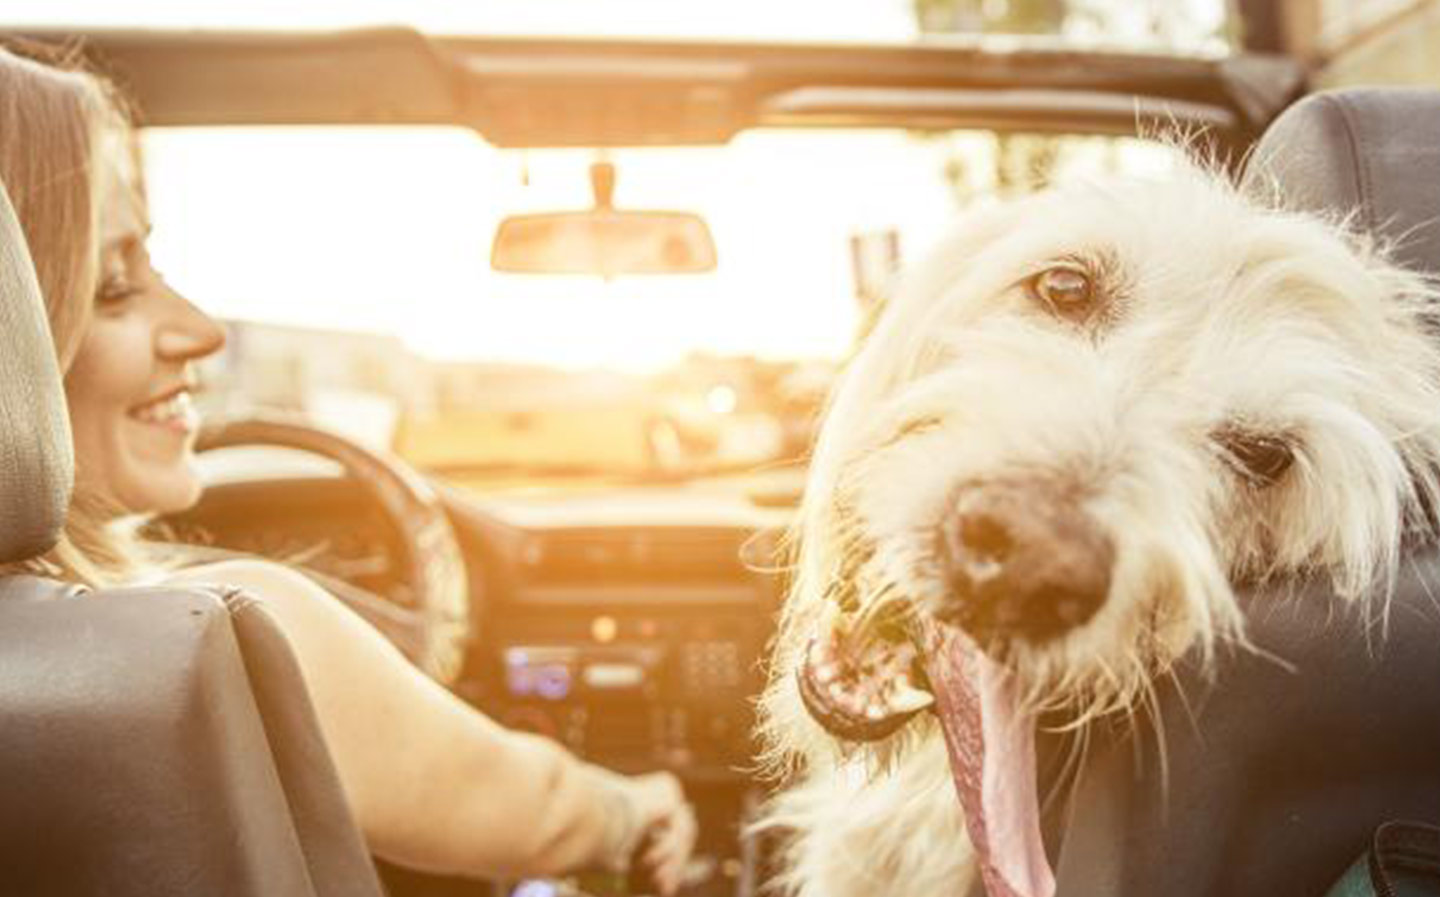 Car seatbelt for your dog? It’s a bone of contention in America